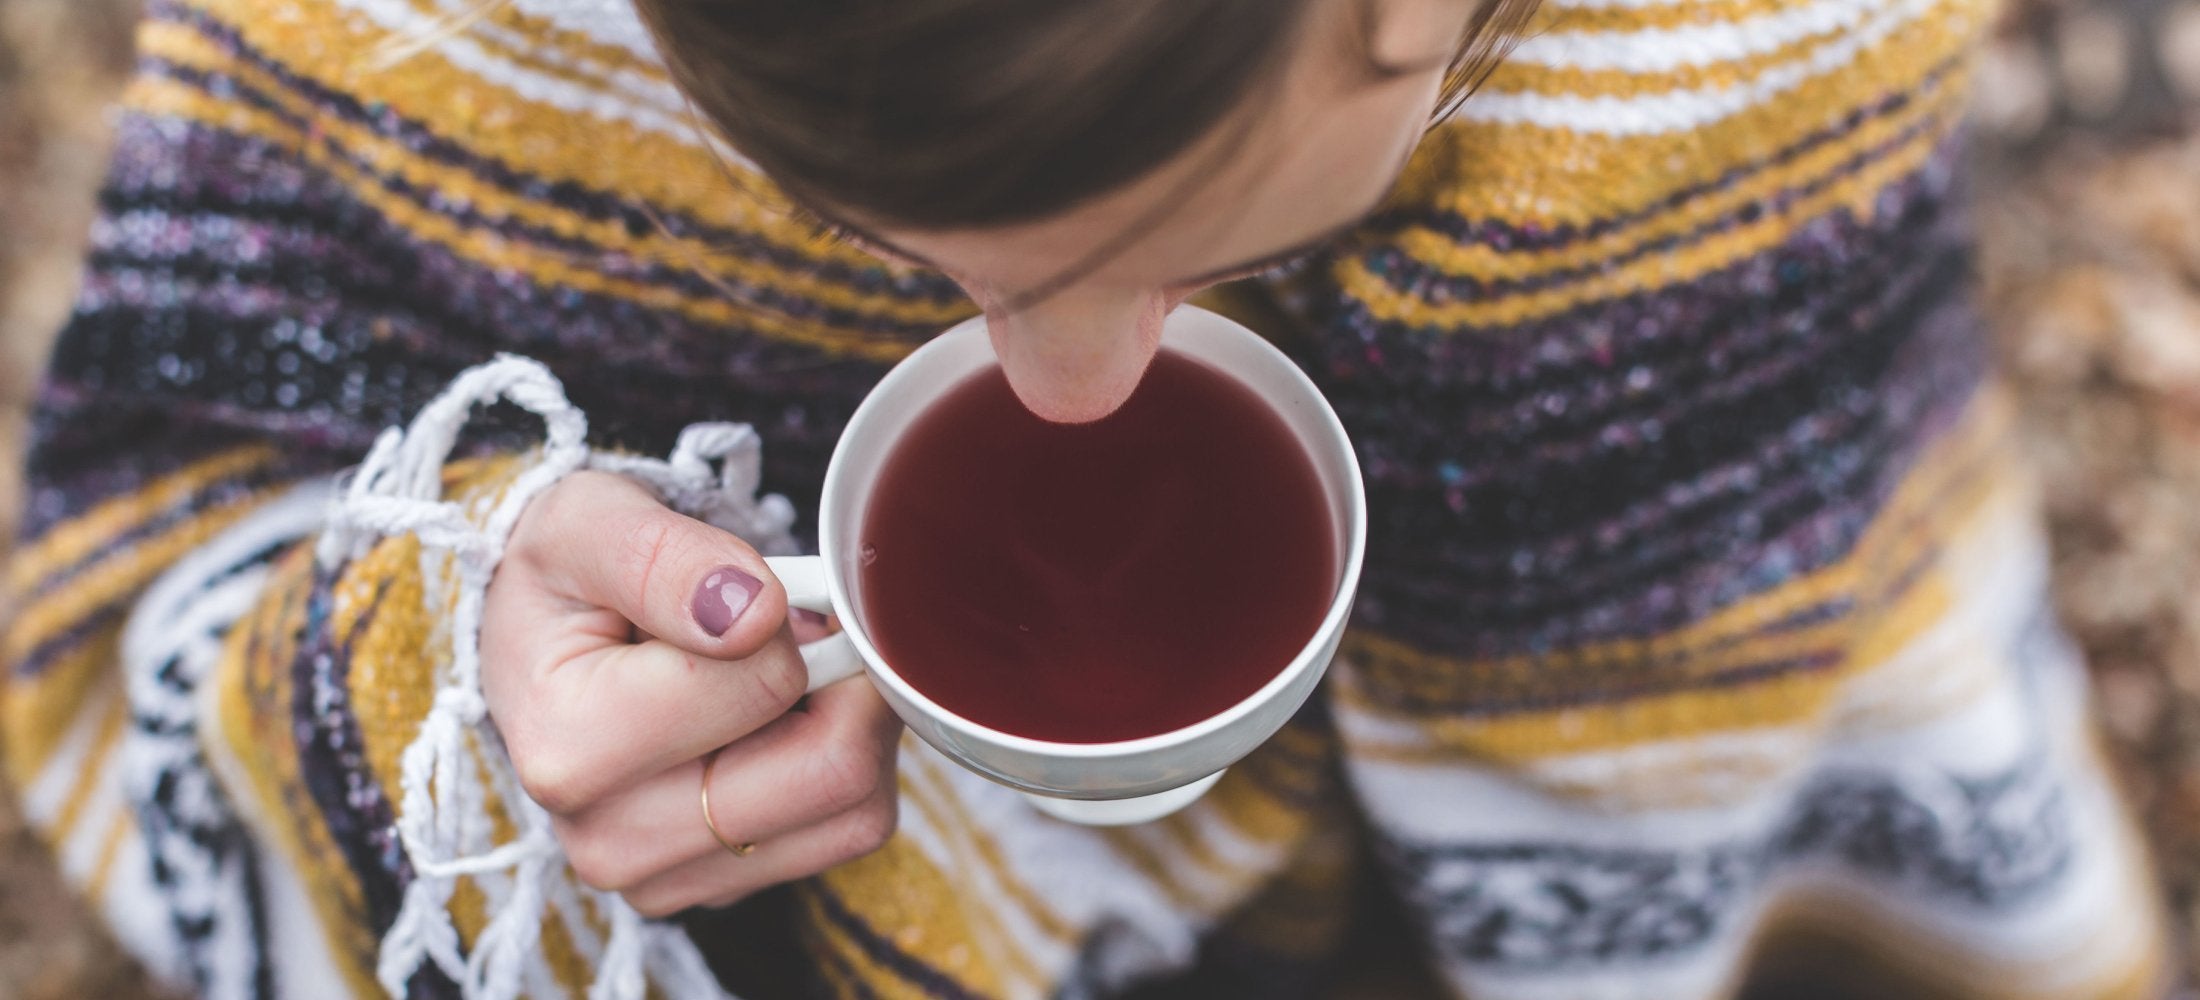 25 Health Benefits That Come With Drinking Tea